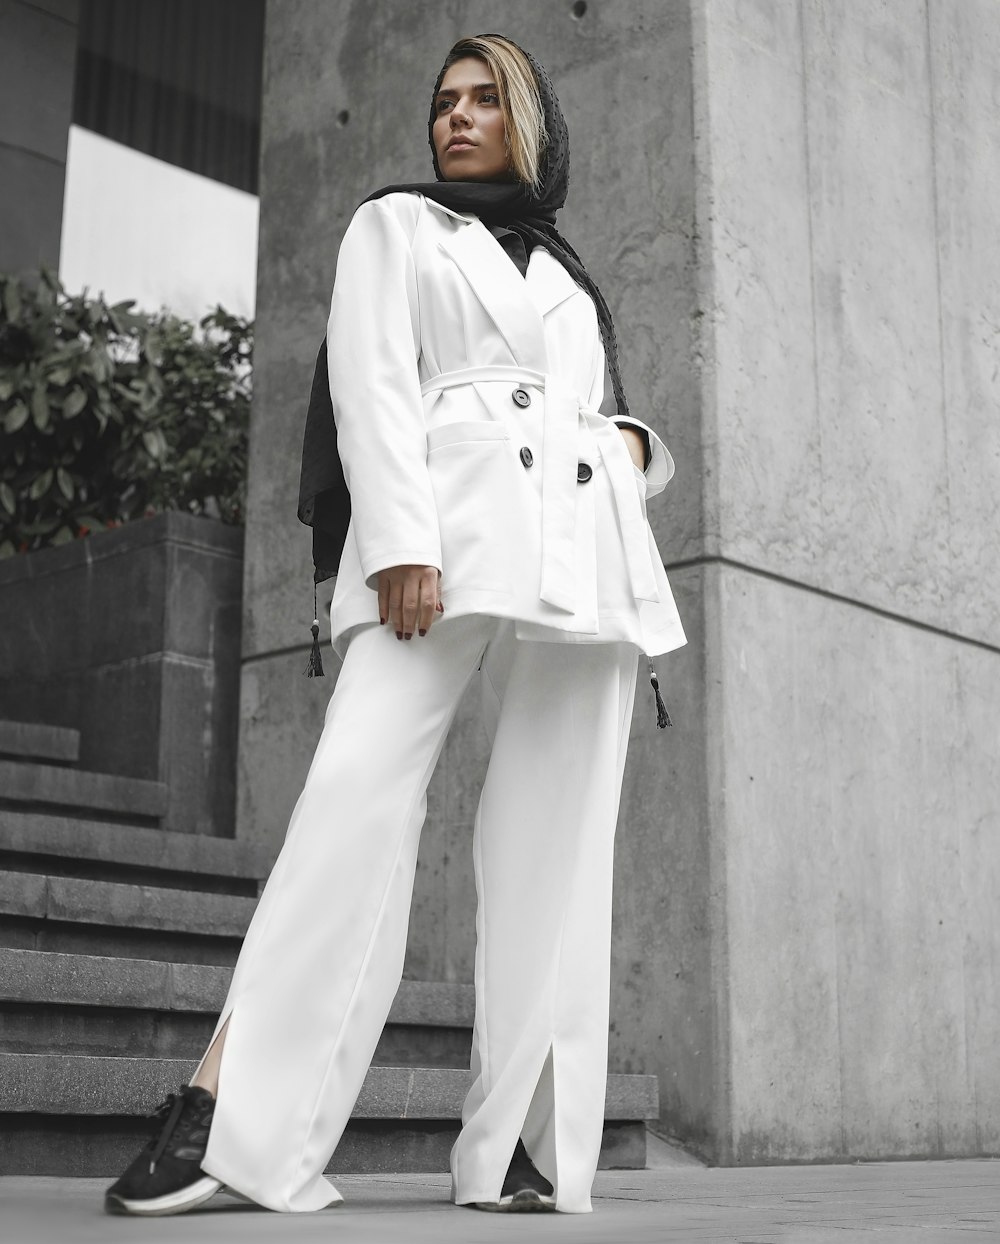 woman in white blazer and white pants standing on stairs